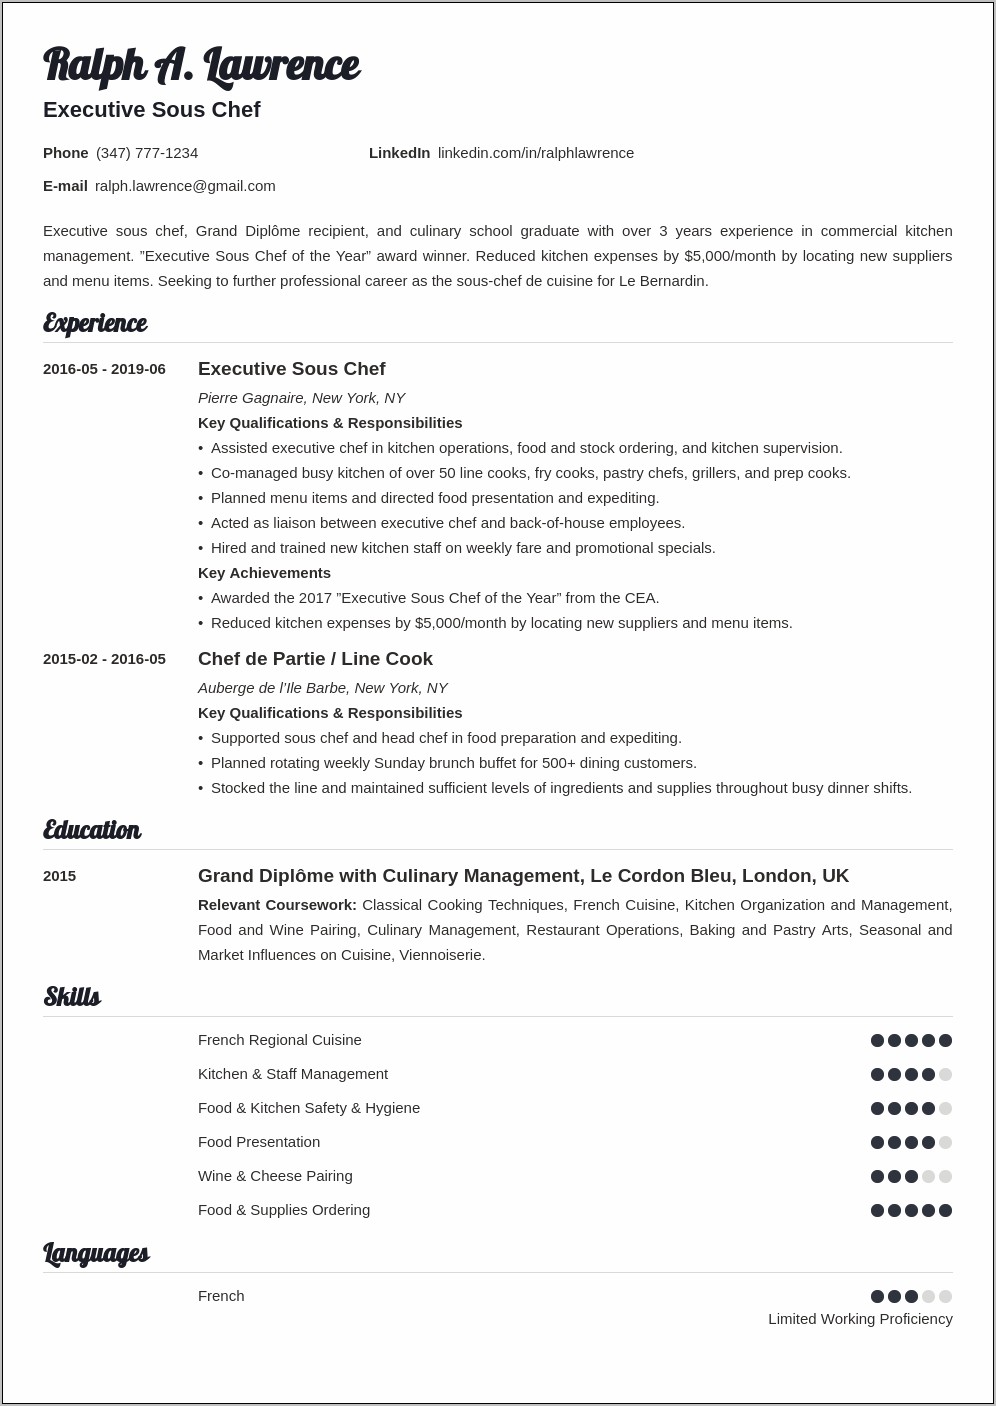 Resume Objective For Chef Position